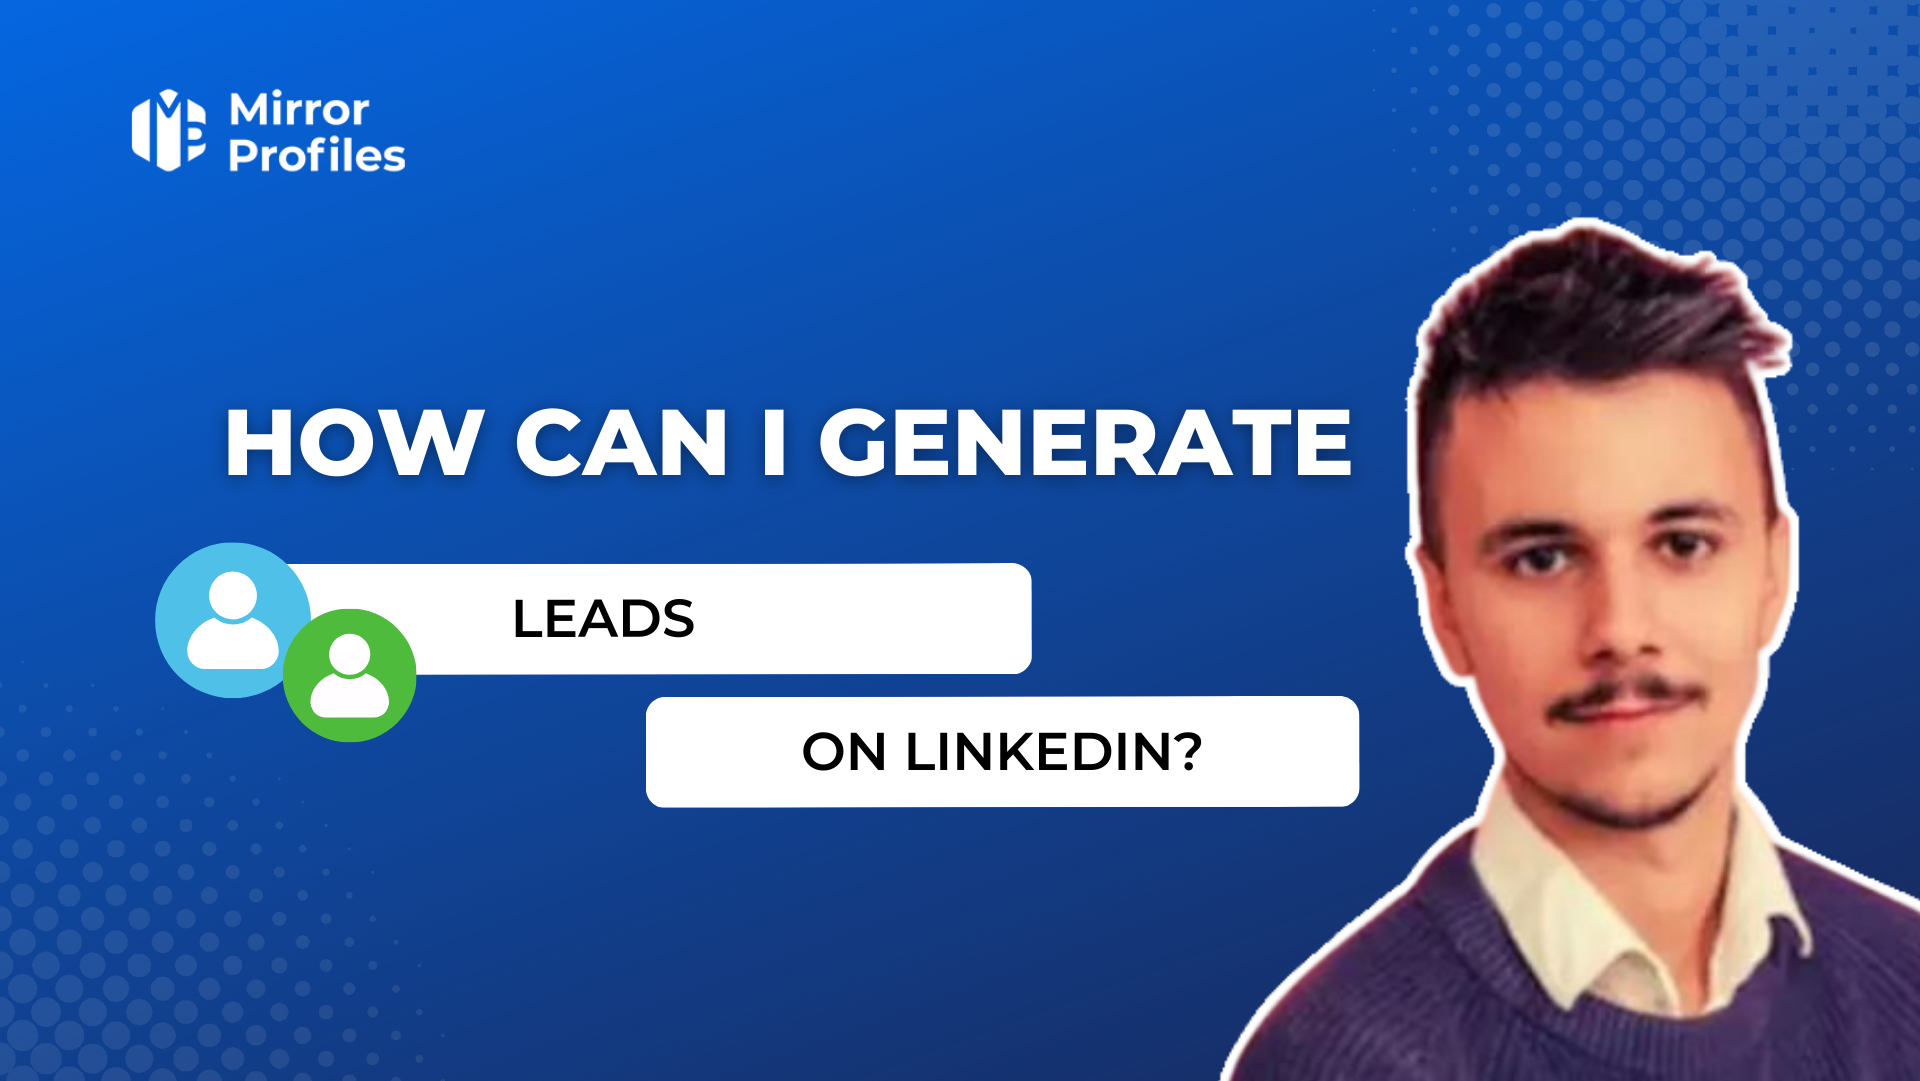 How can I generate leads on Linkedin?